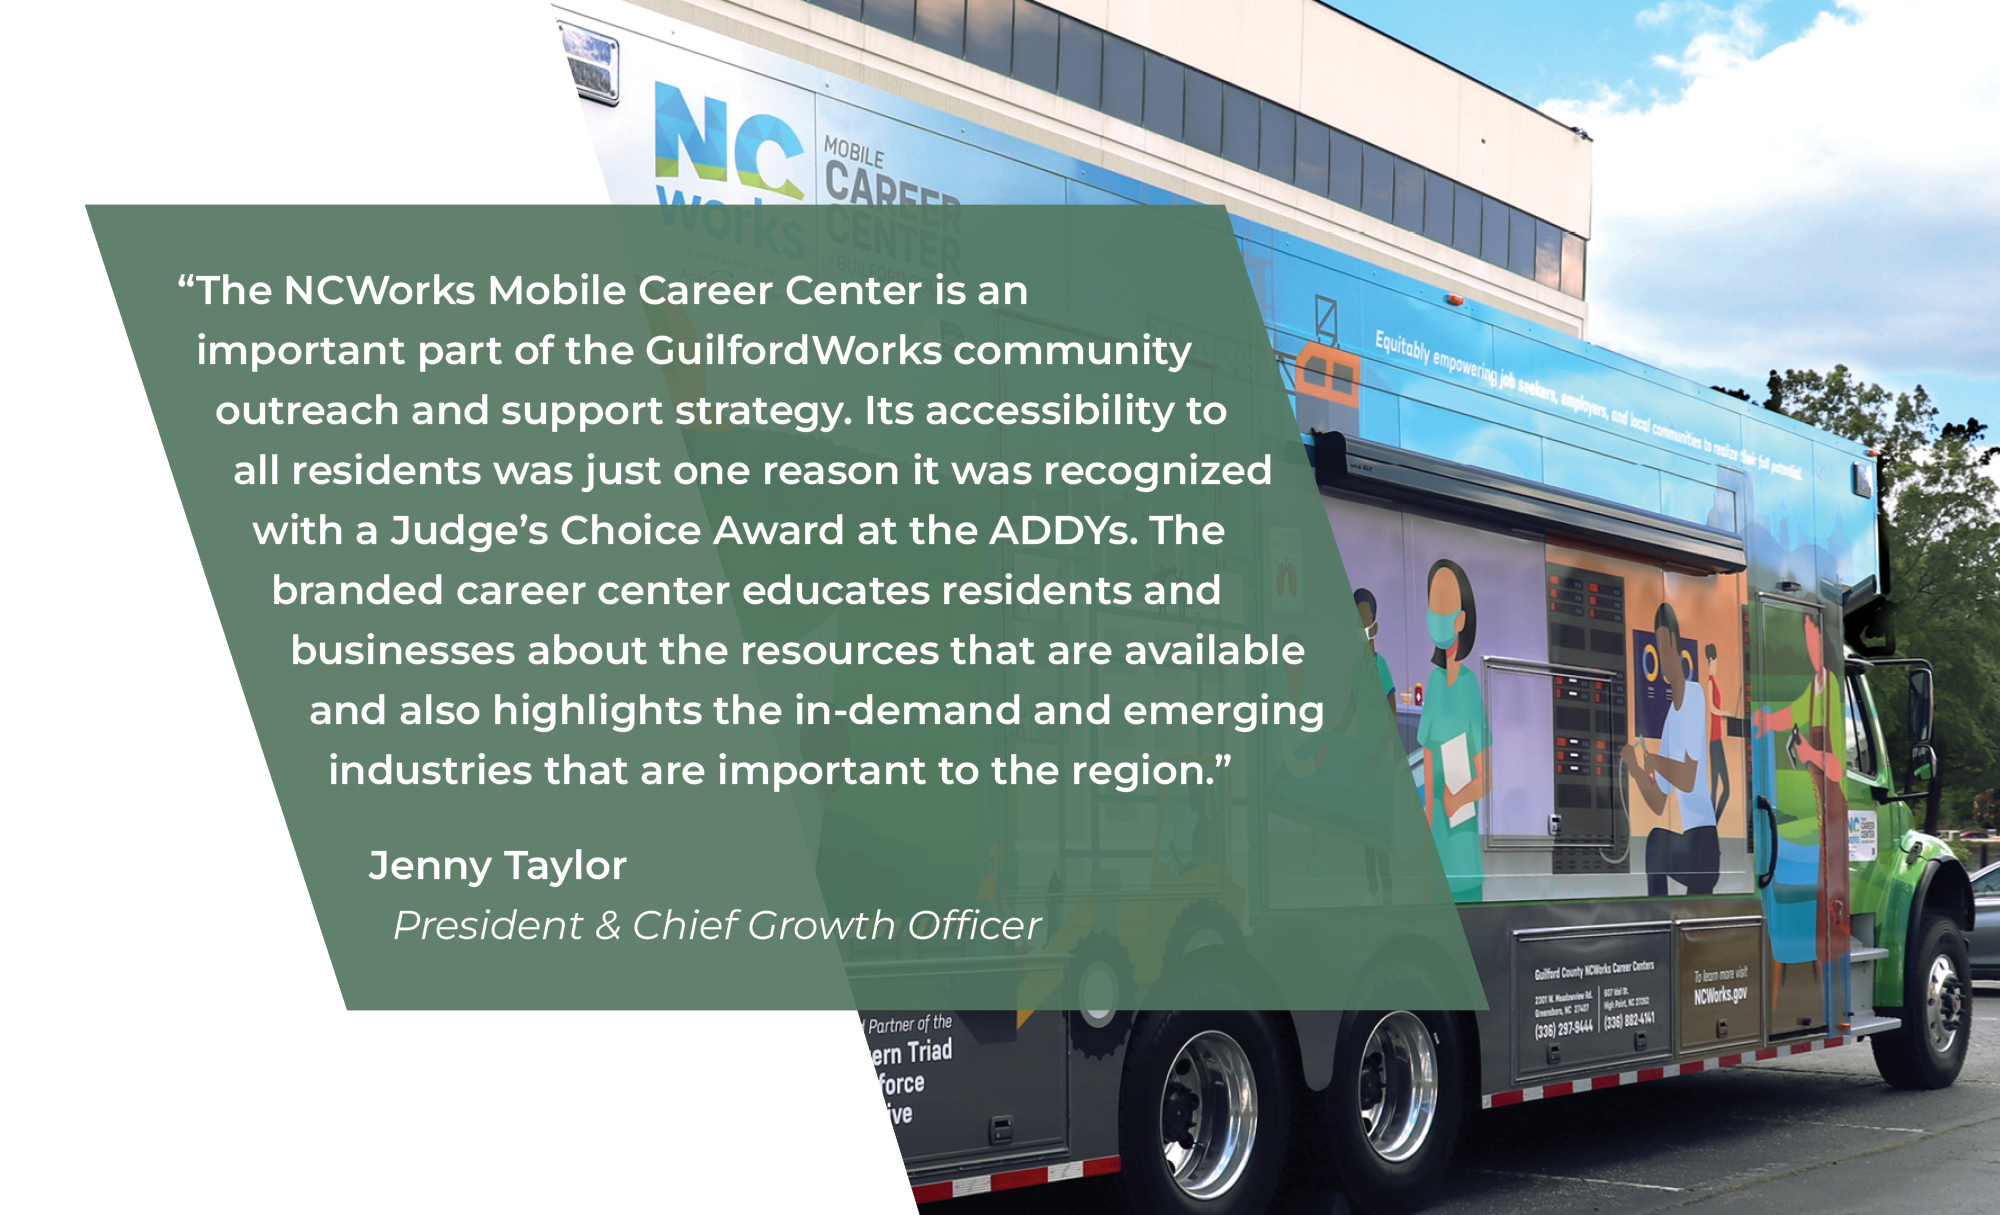 The NCWorks Mobile Career Center is an important part of the GuilfordWorks community outreach and support strategy. Its accessibility to all residents was just one reason it was recognized with a Judge’s Choice Award at the ADDYs. The branded career center educates residents and businesses about the resources that are available and also highlights the in-demand and emerging industries that are important to the region.